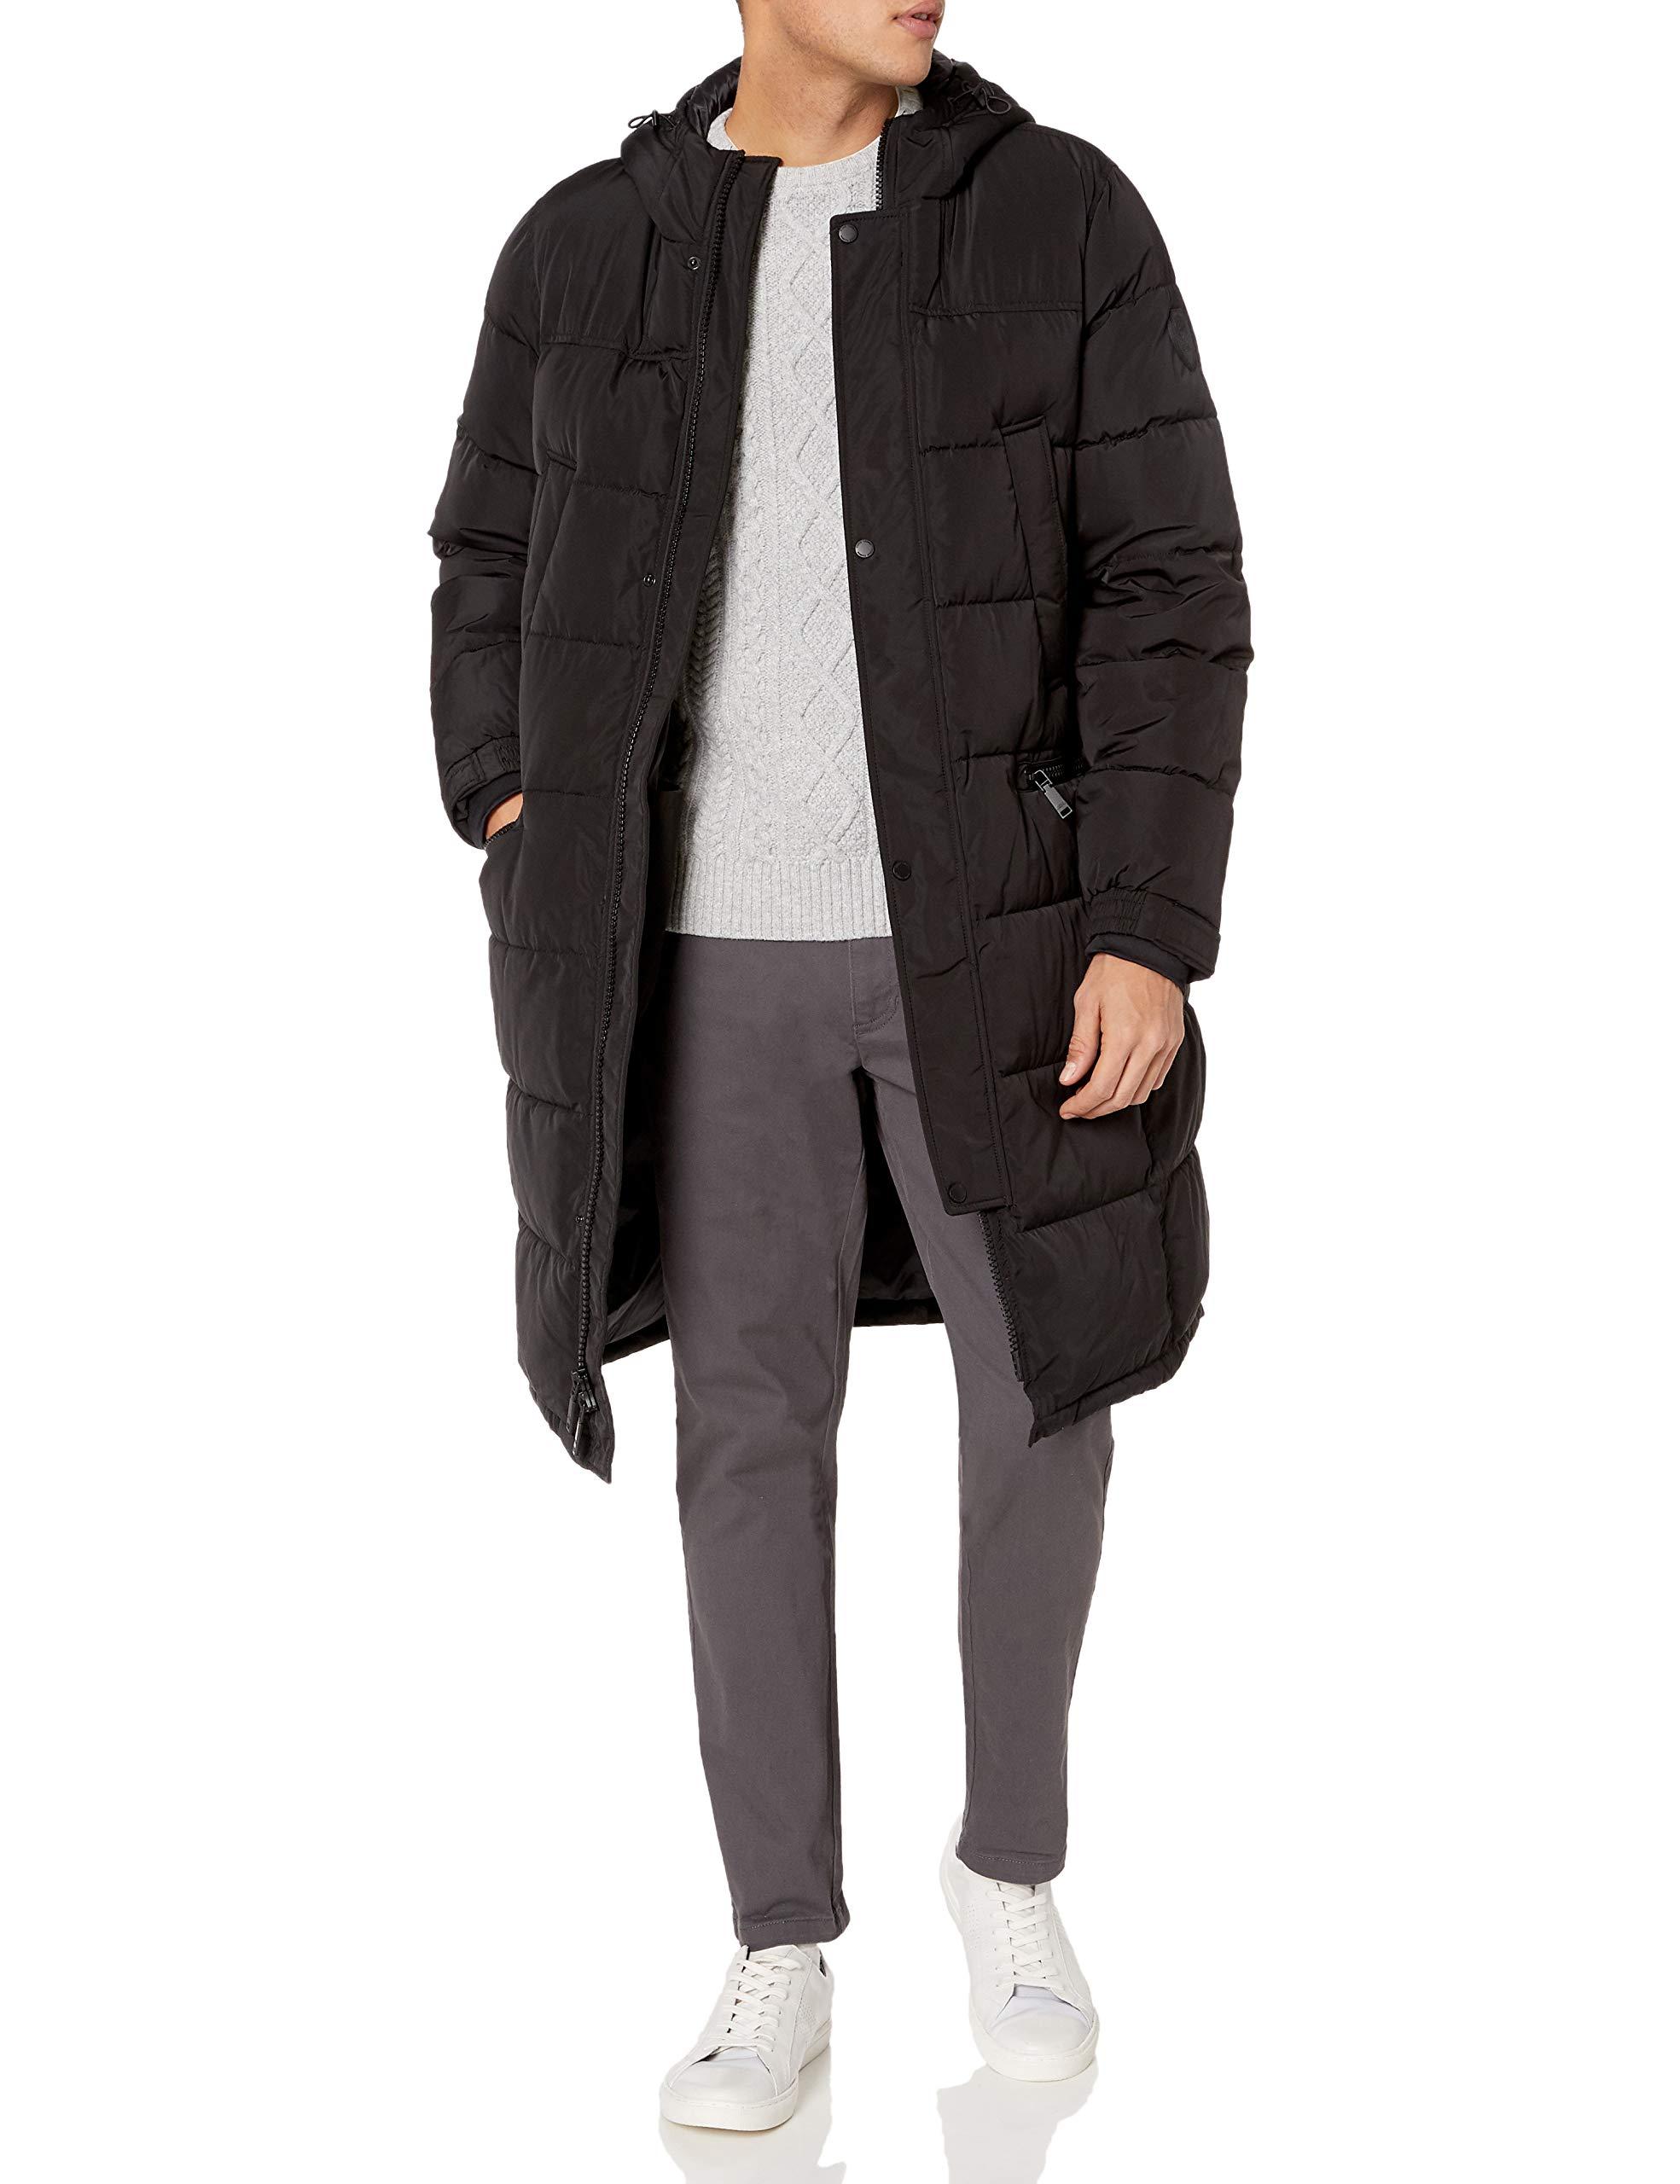 Vince Camuto Long Insulated Warm Winter Coat Parka in Black for Men ...